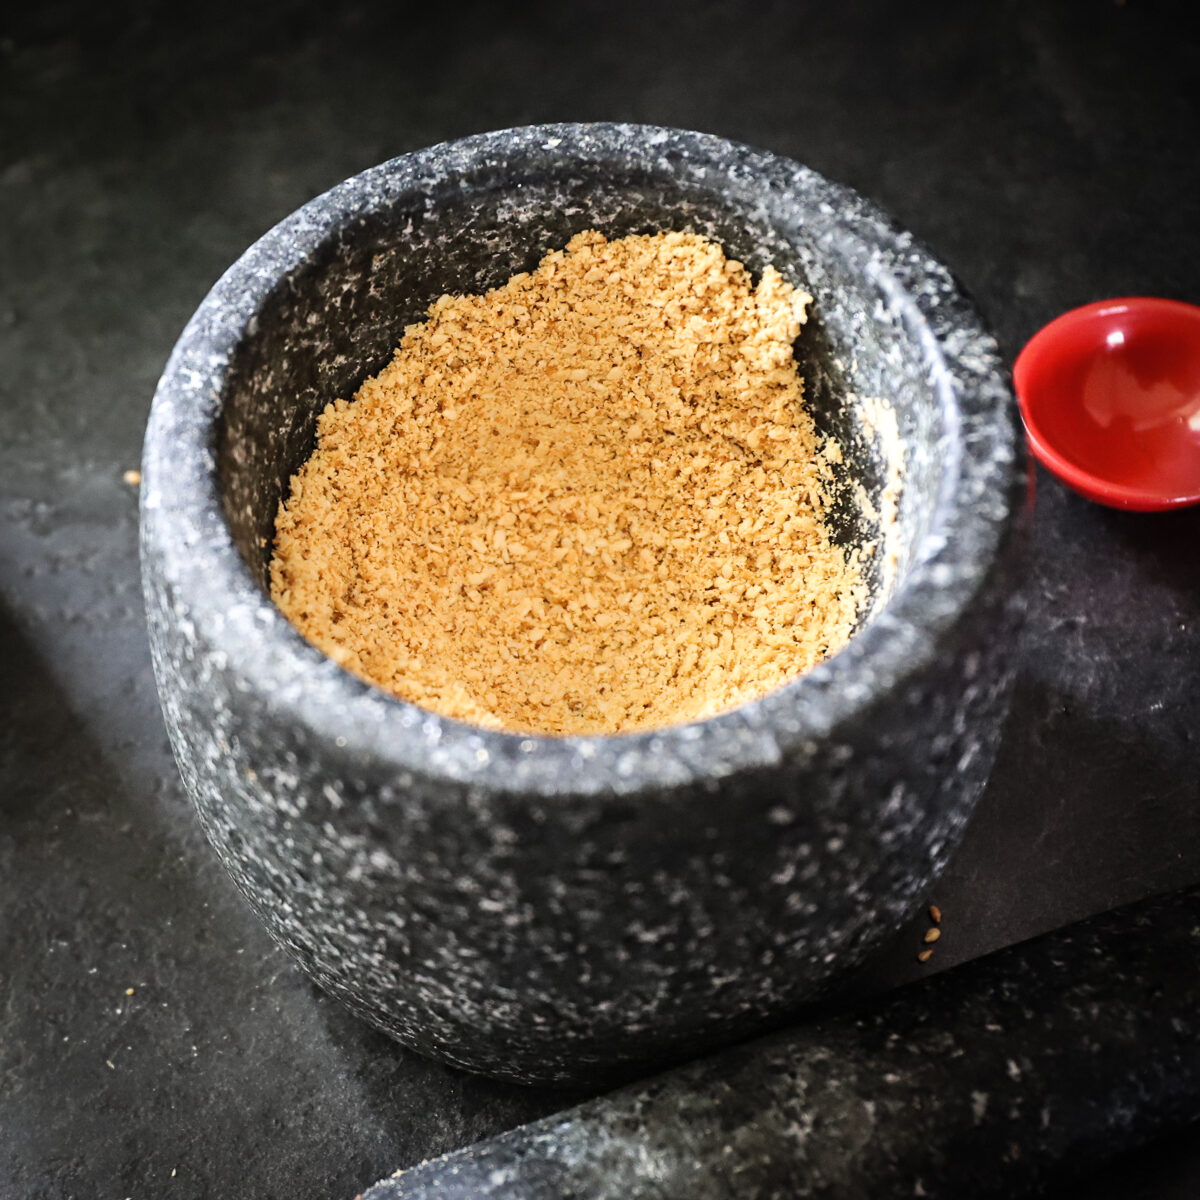 The roasted sesame seeds have been ground to a mealy paste texture with the mortar and pestle.